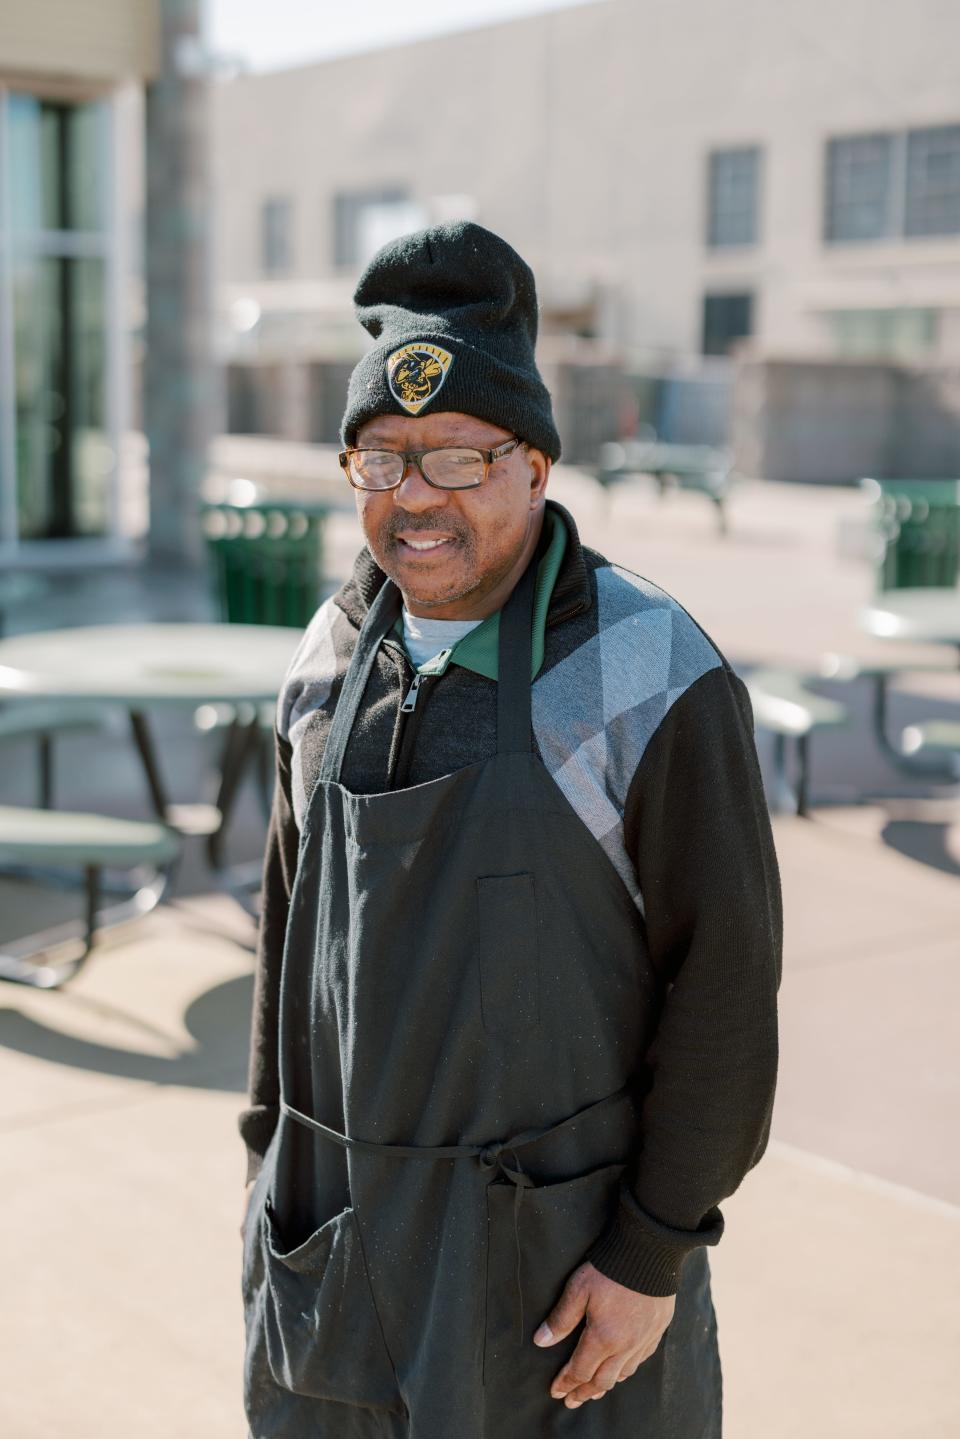 Jeffrey Irving is a food service assistant at Stockton Unified School District.